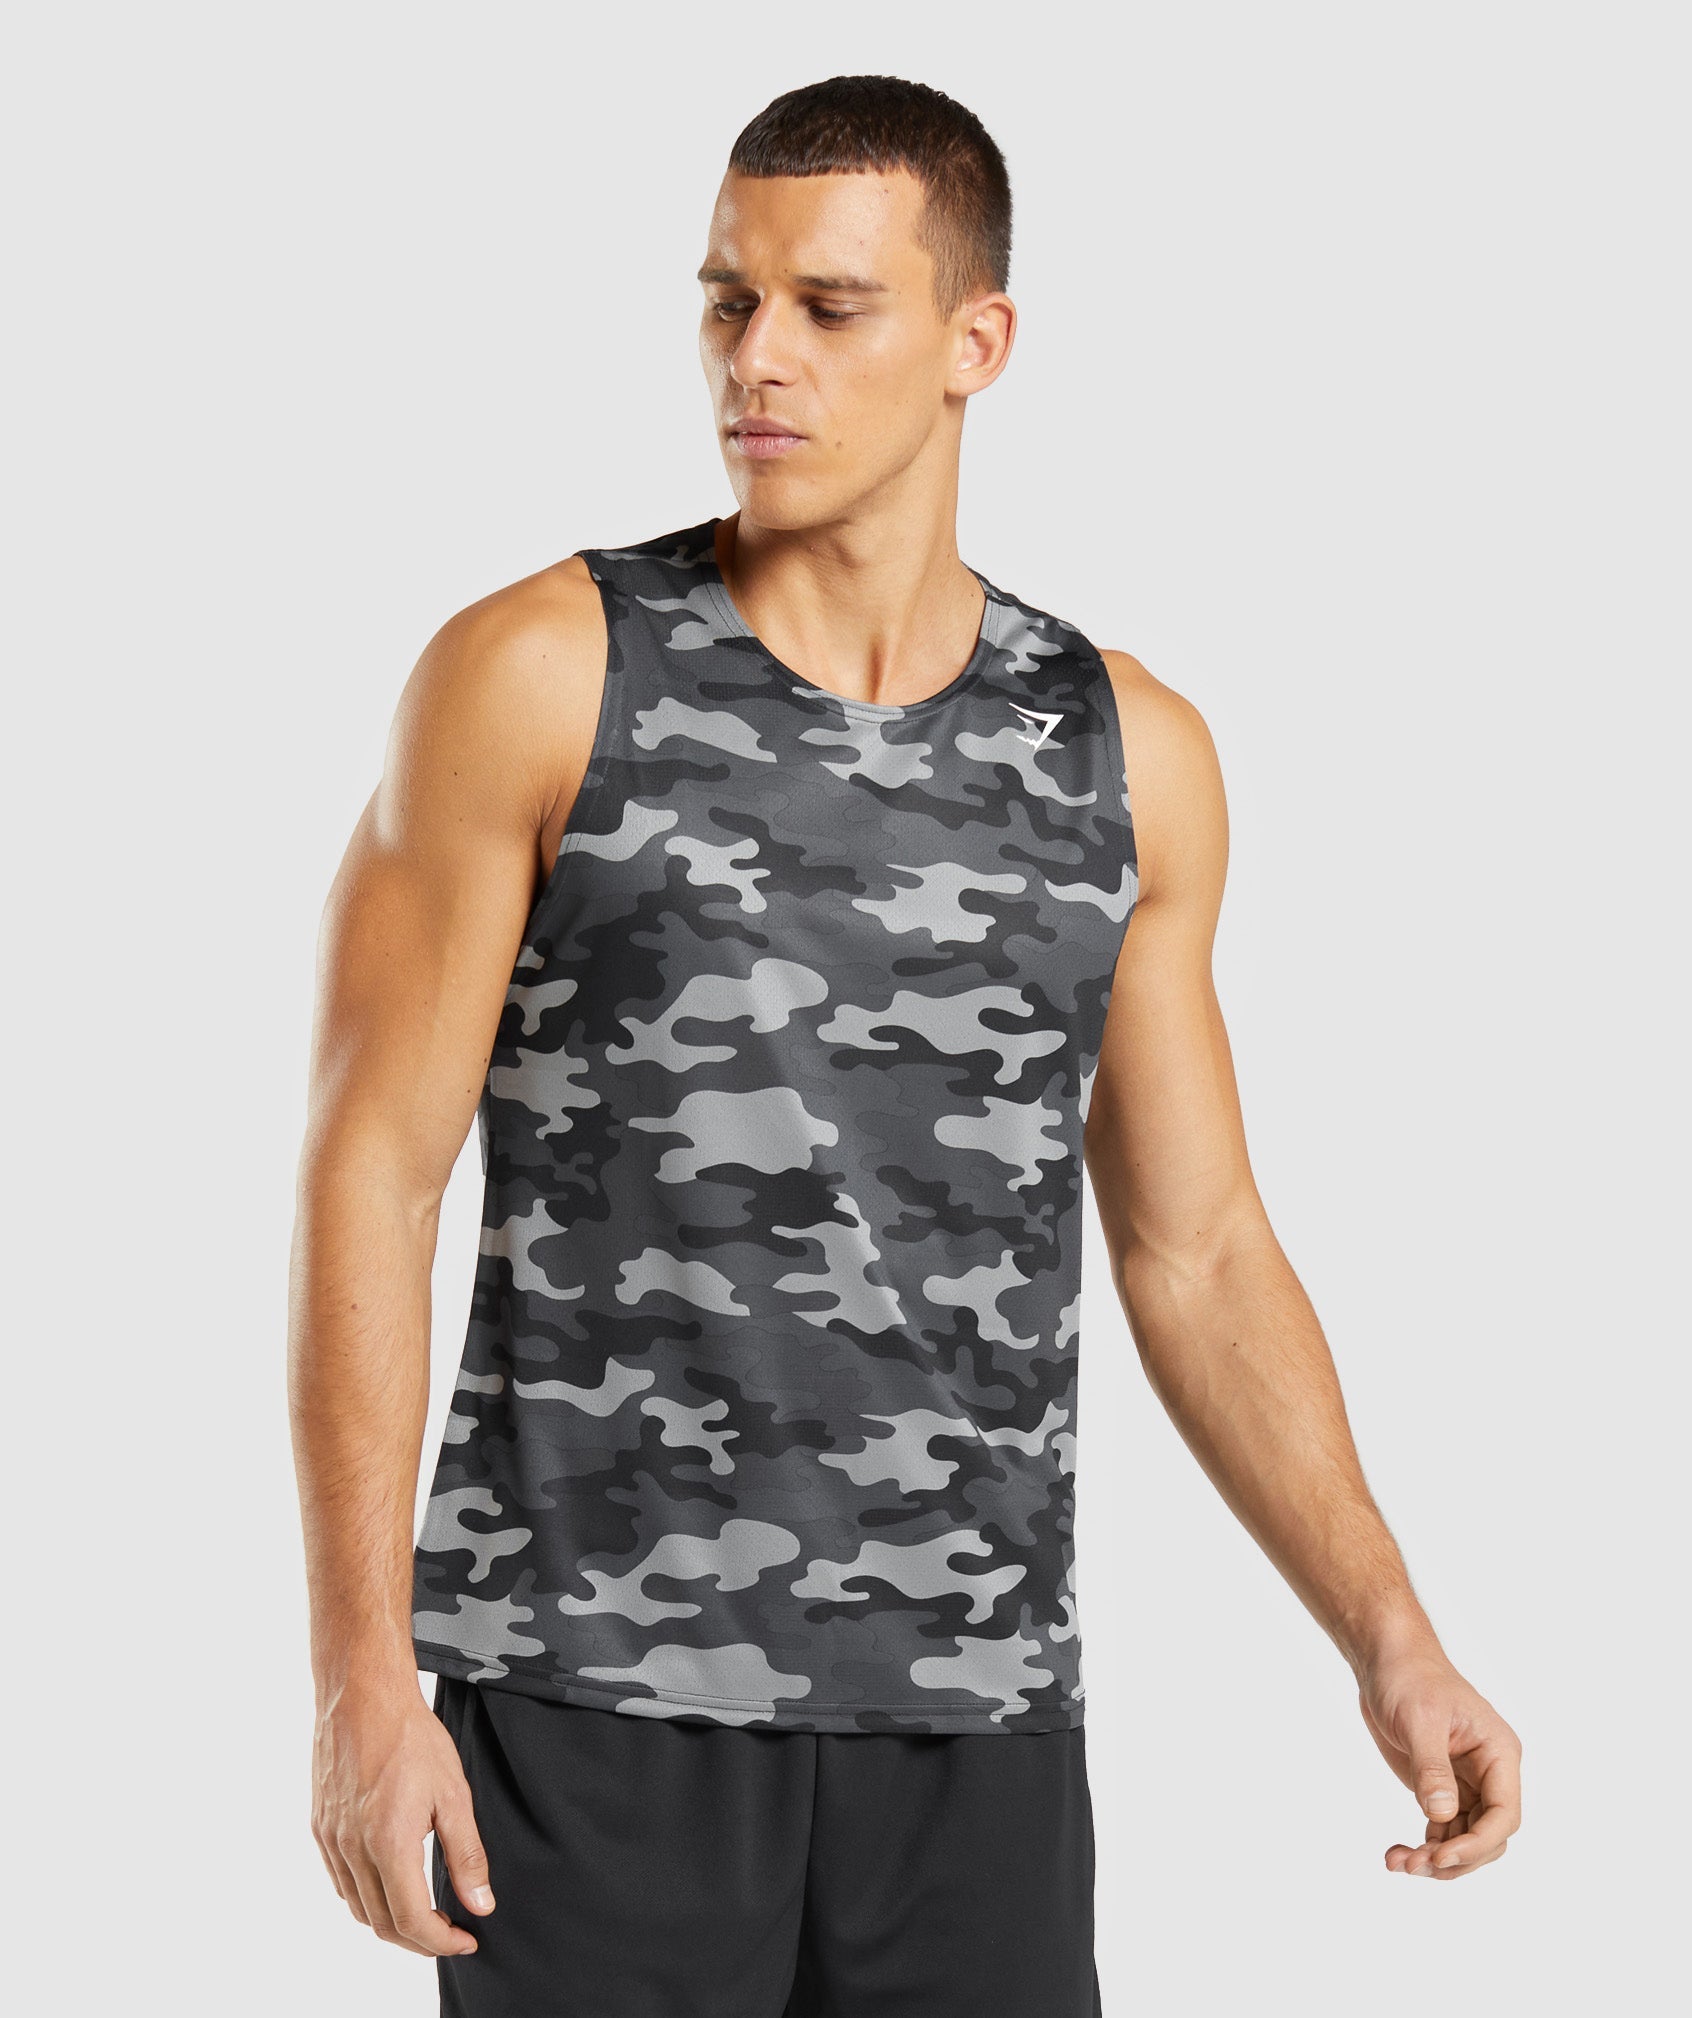 Arrival Tank in Grey Print - view 1